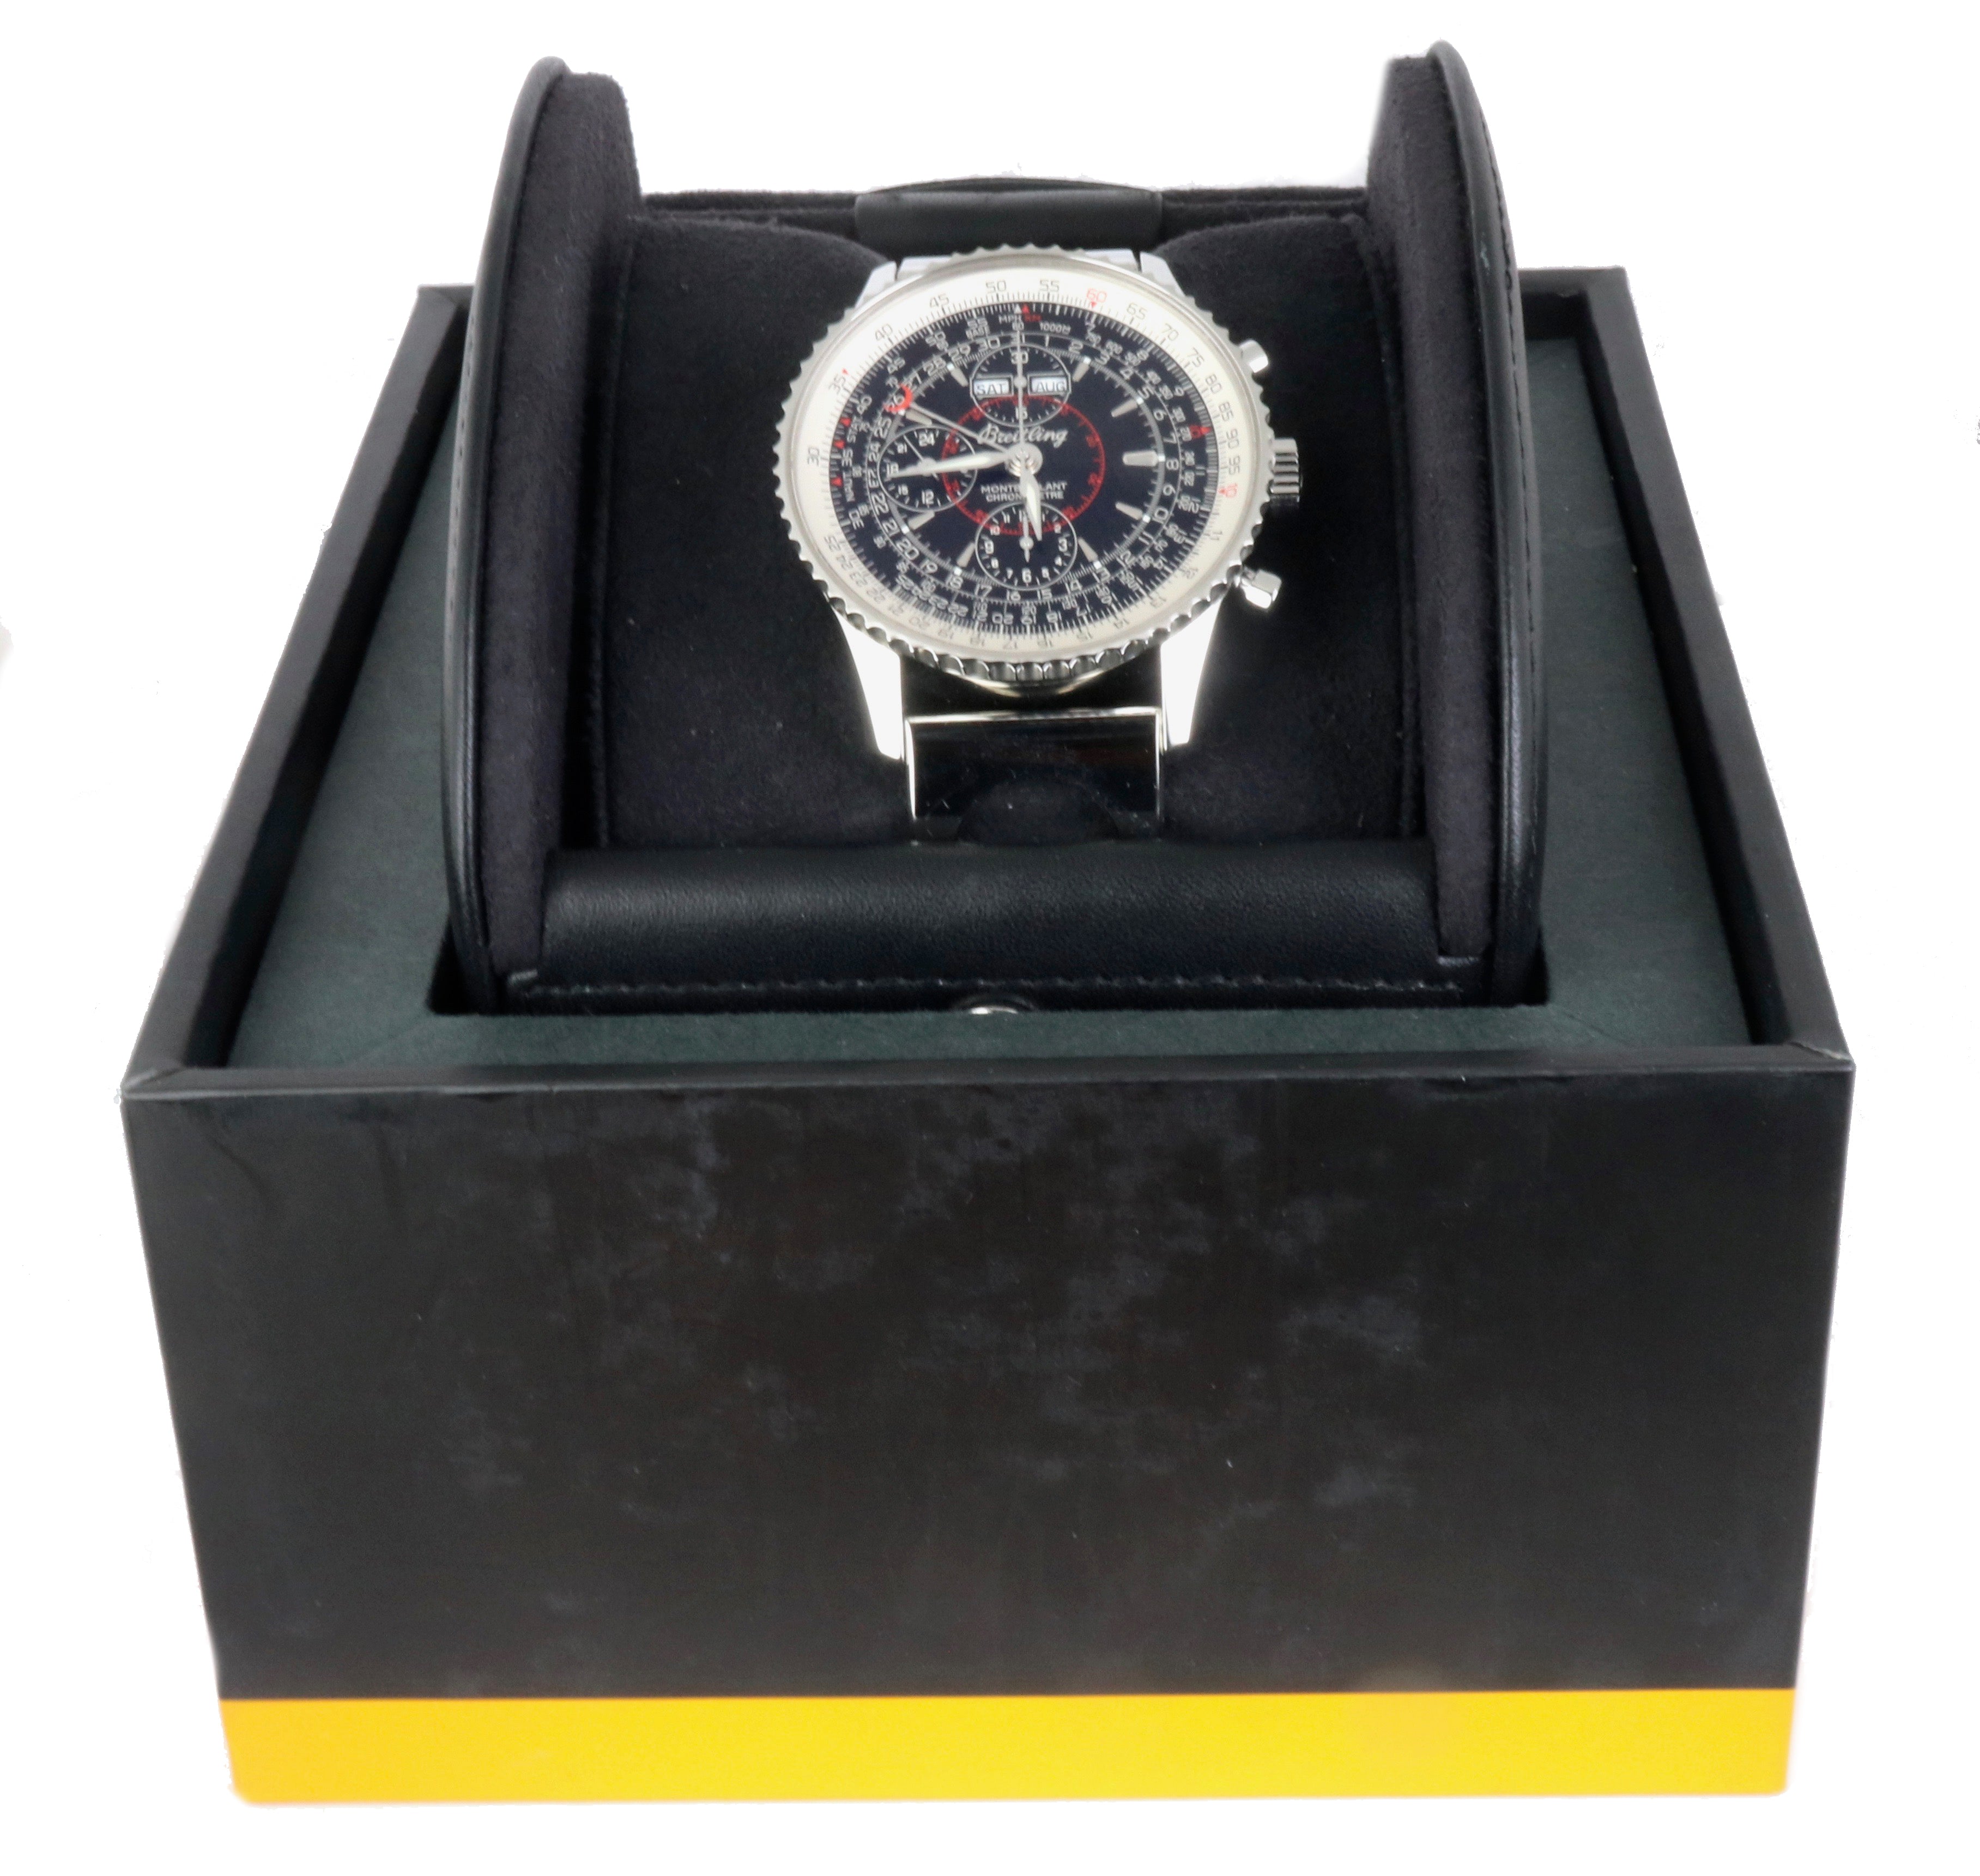 Breitling Datora Montbrillant Black Air Racer Chronograph Stainless Auto A21330